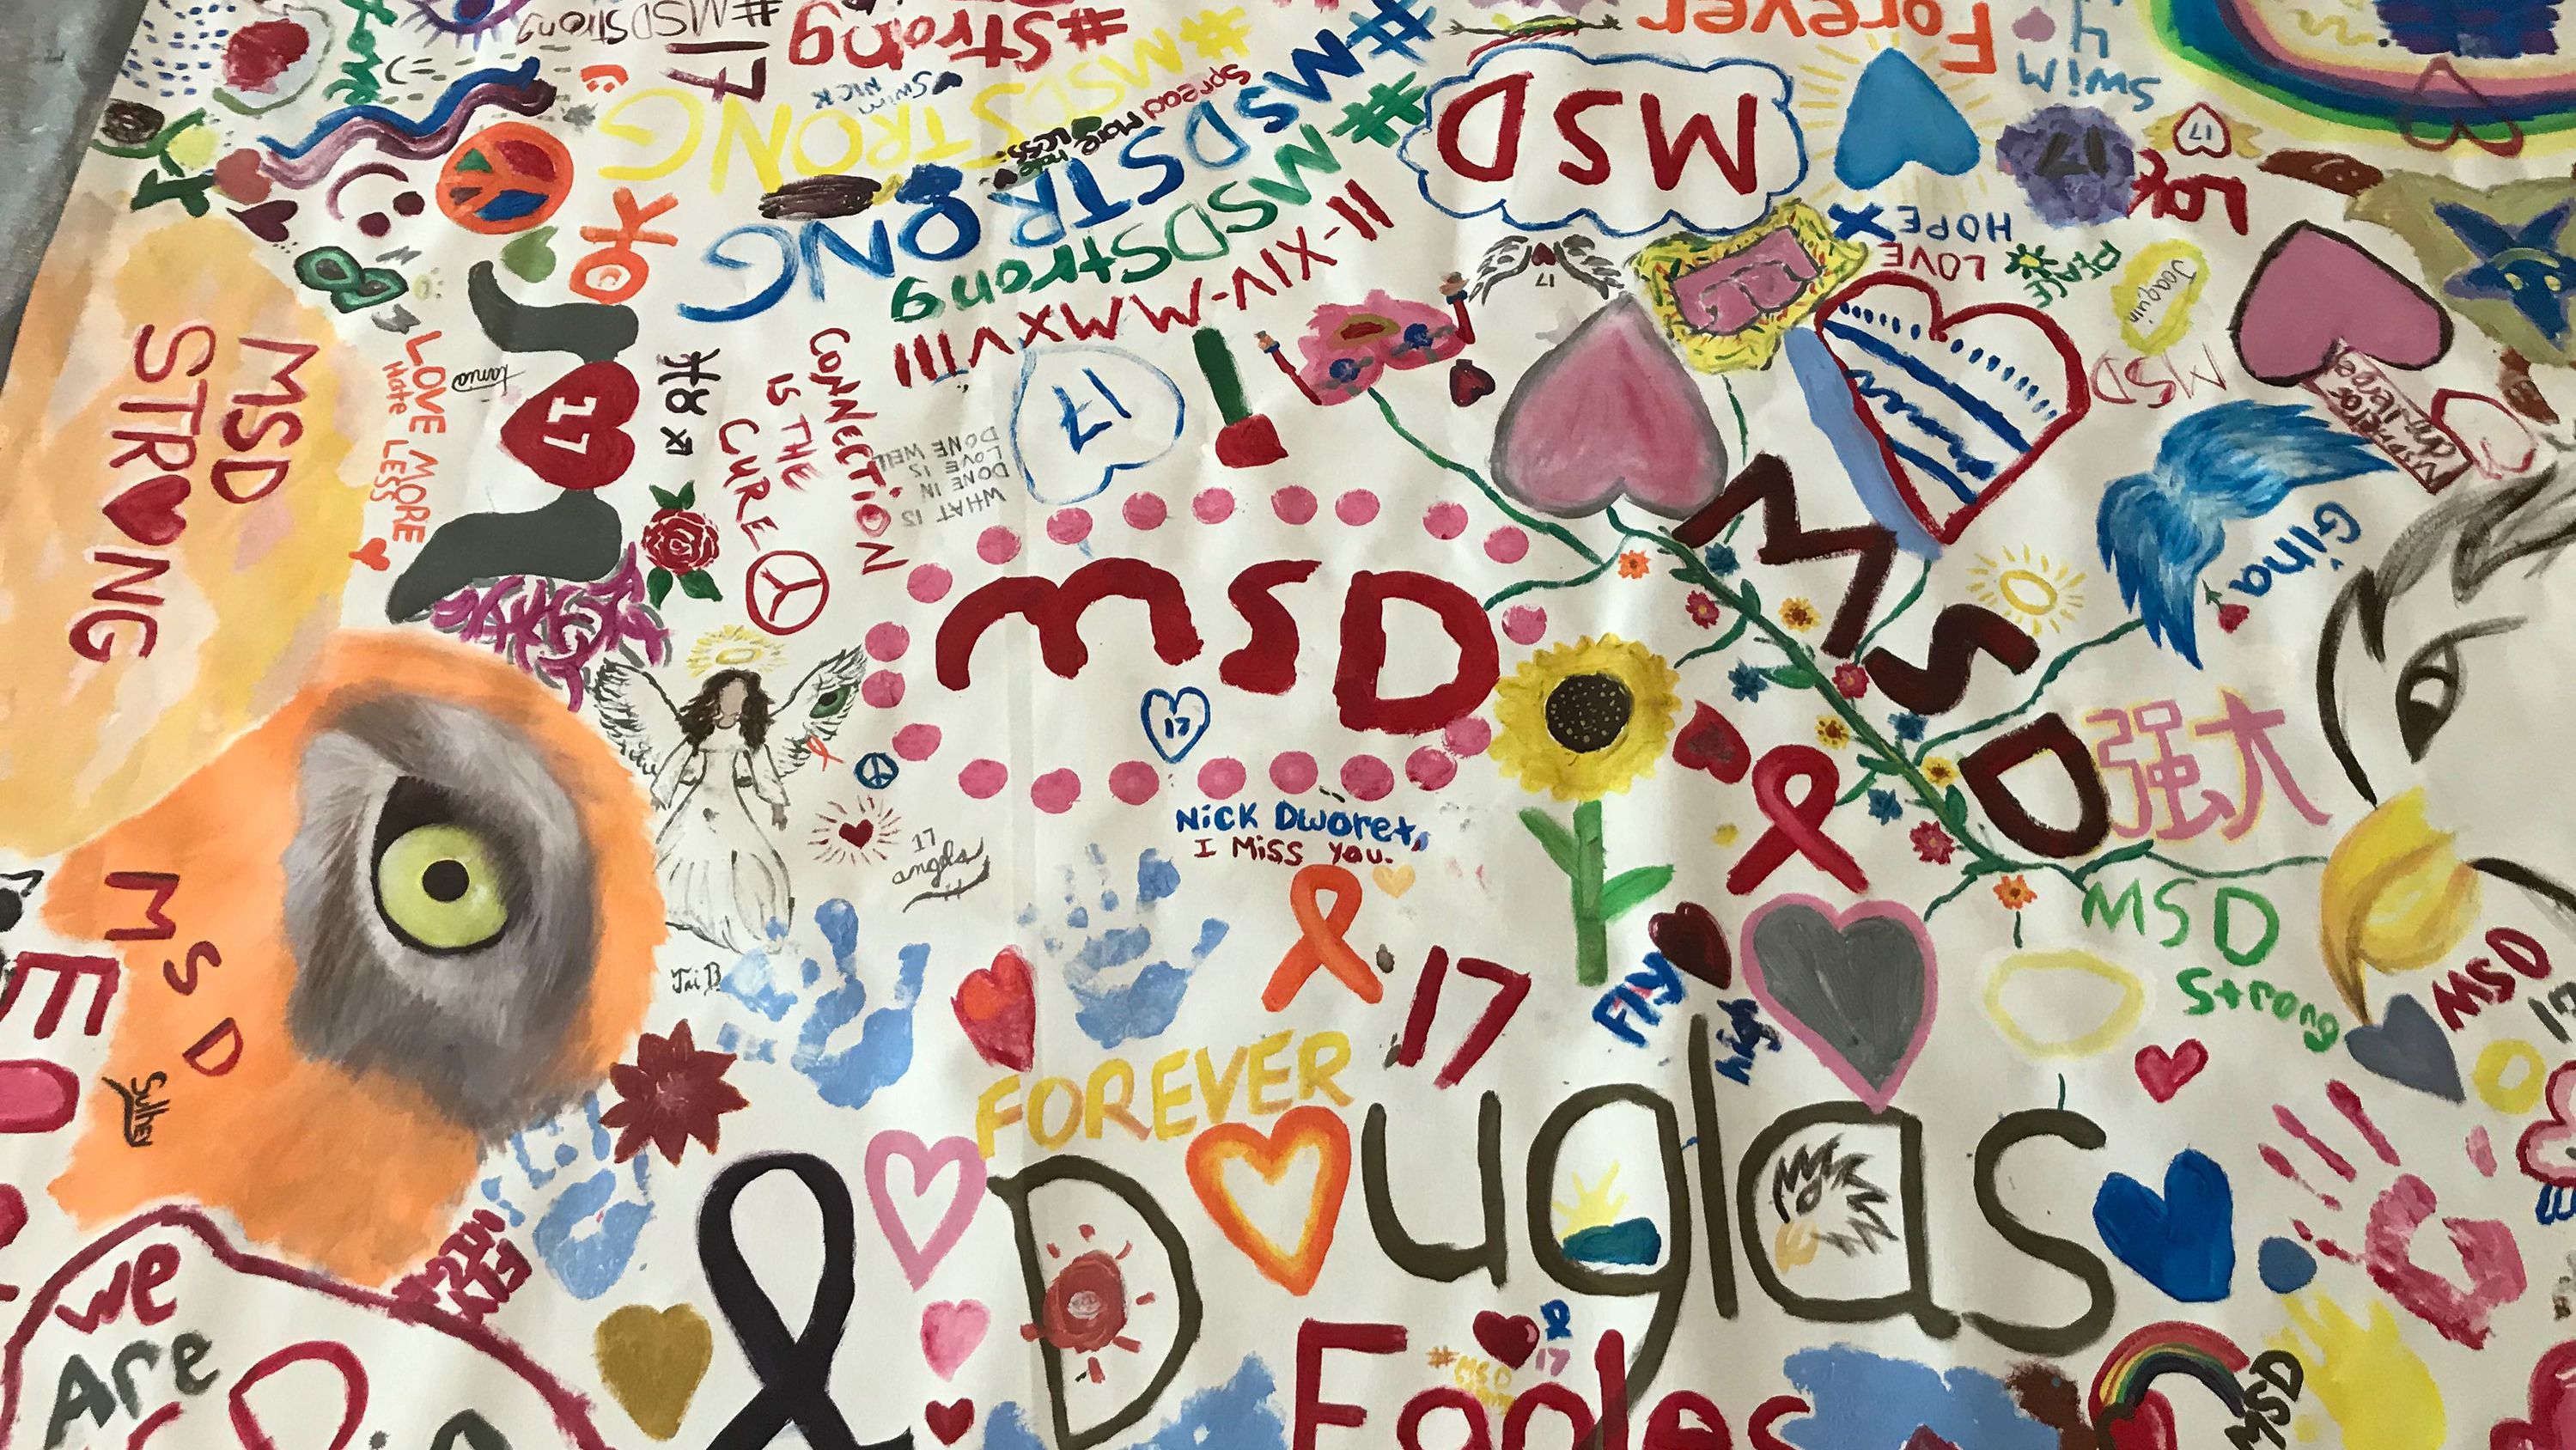 Students from Marjory Stoneman Douglas created a canvas mural at the library on the anniversary of the mass shooting.